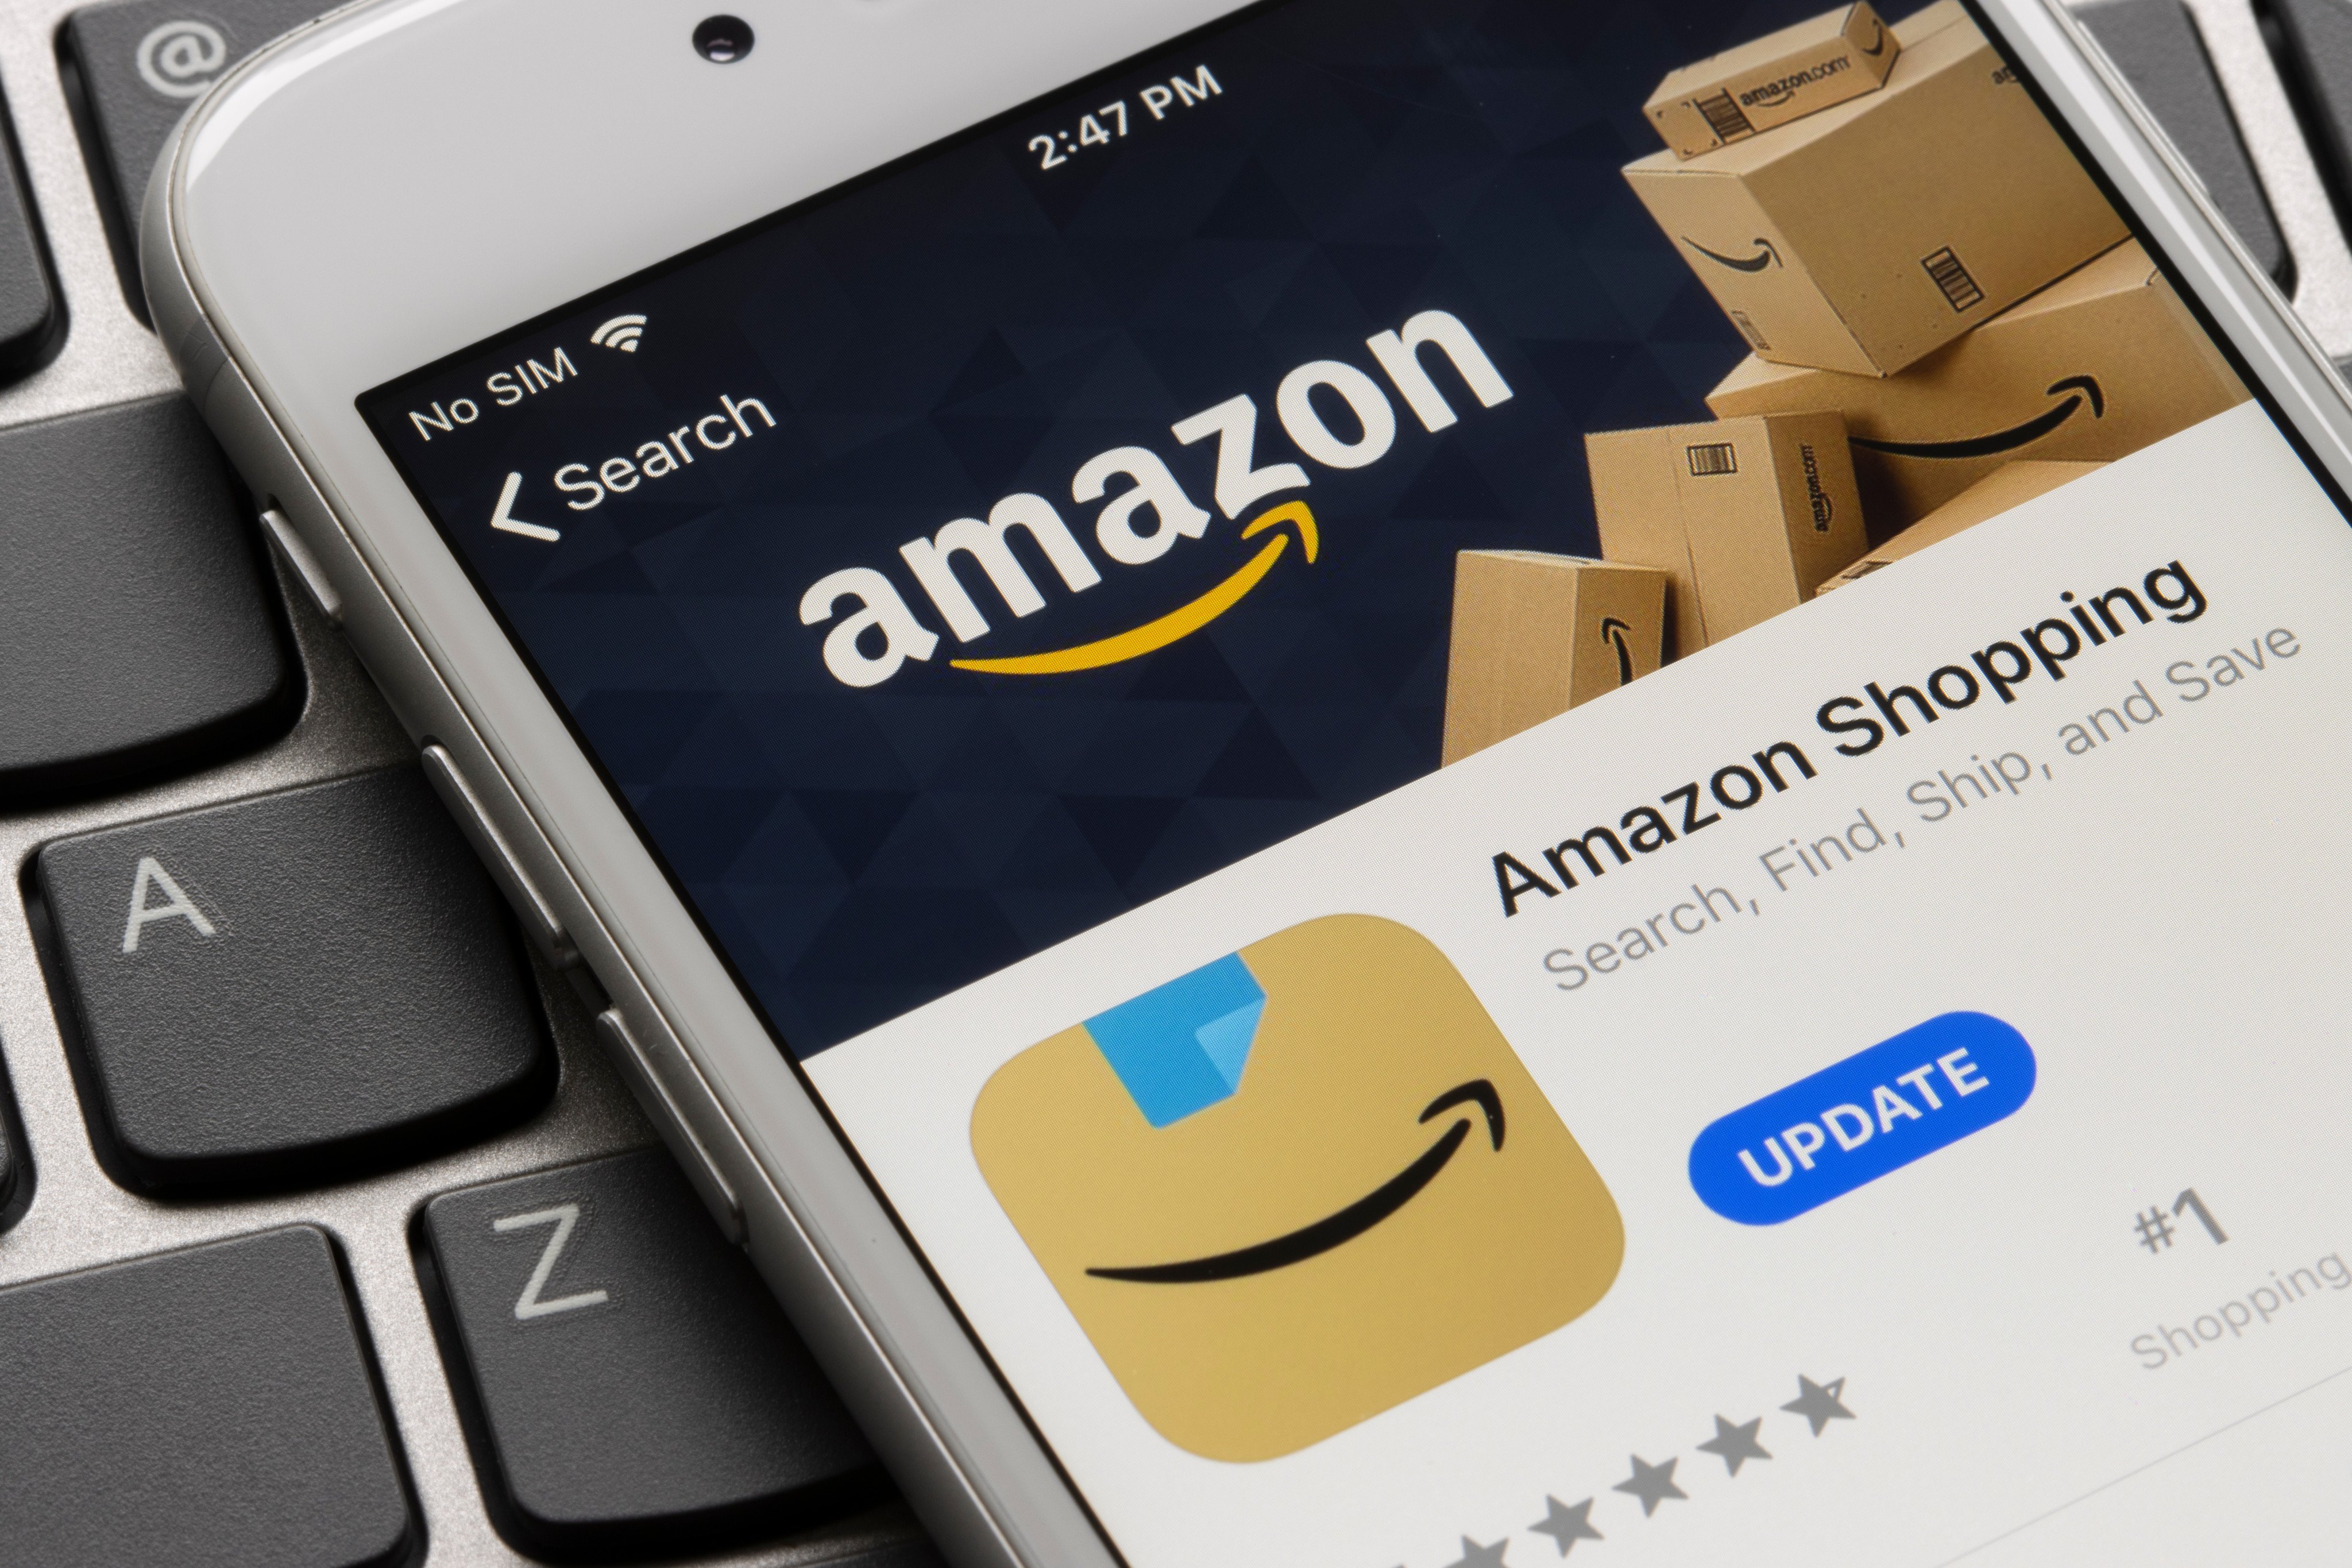 Amazon.com’s foray into the discount-shopping market segment shows a renewed effort to broaden its “Made in China, sold on Amazon” community. Photo: Shutterstock